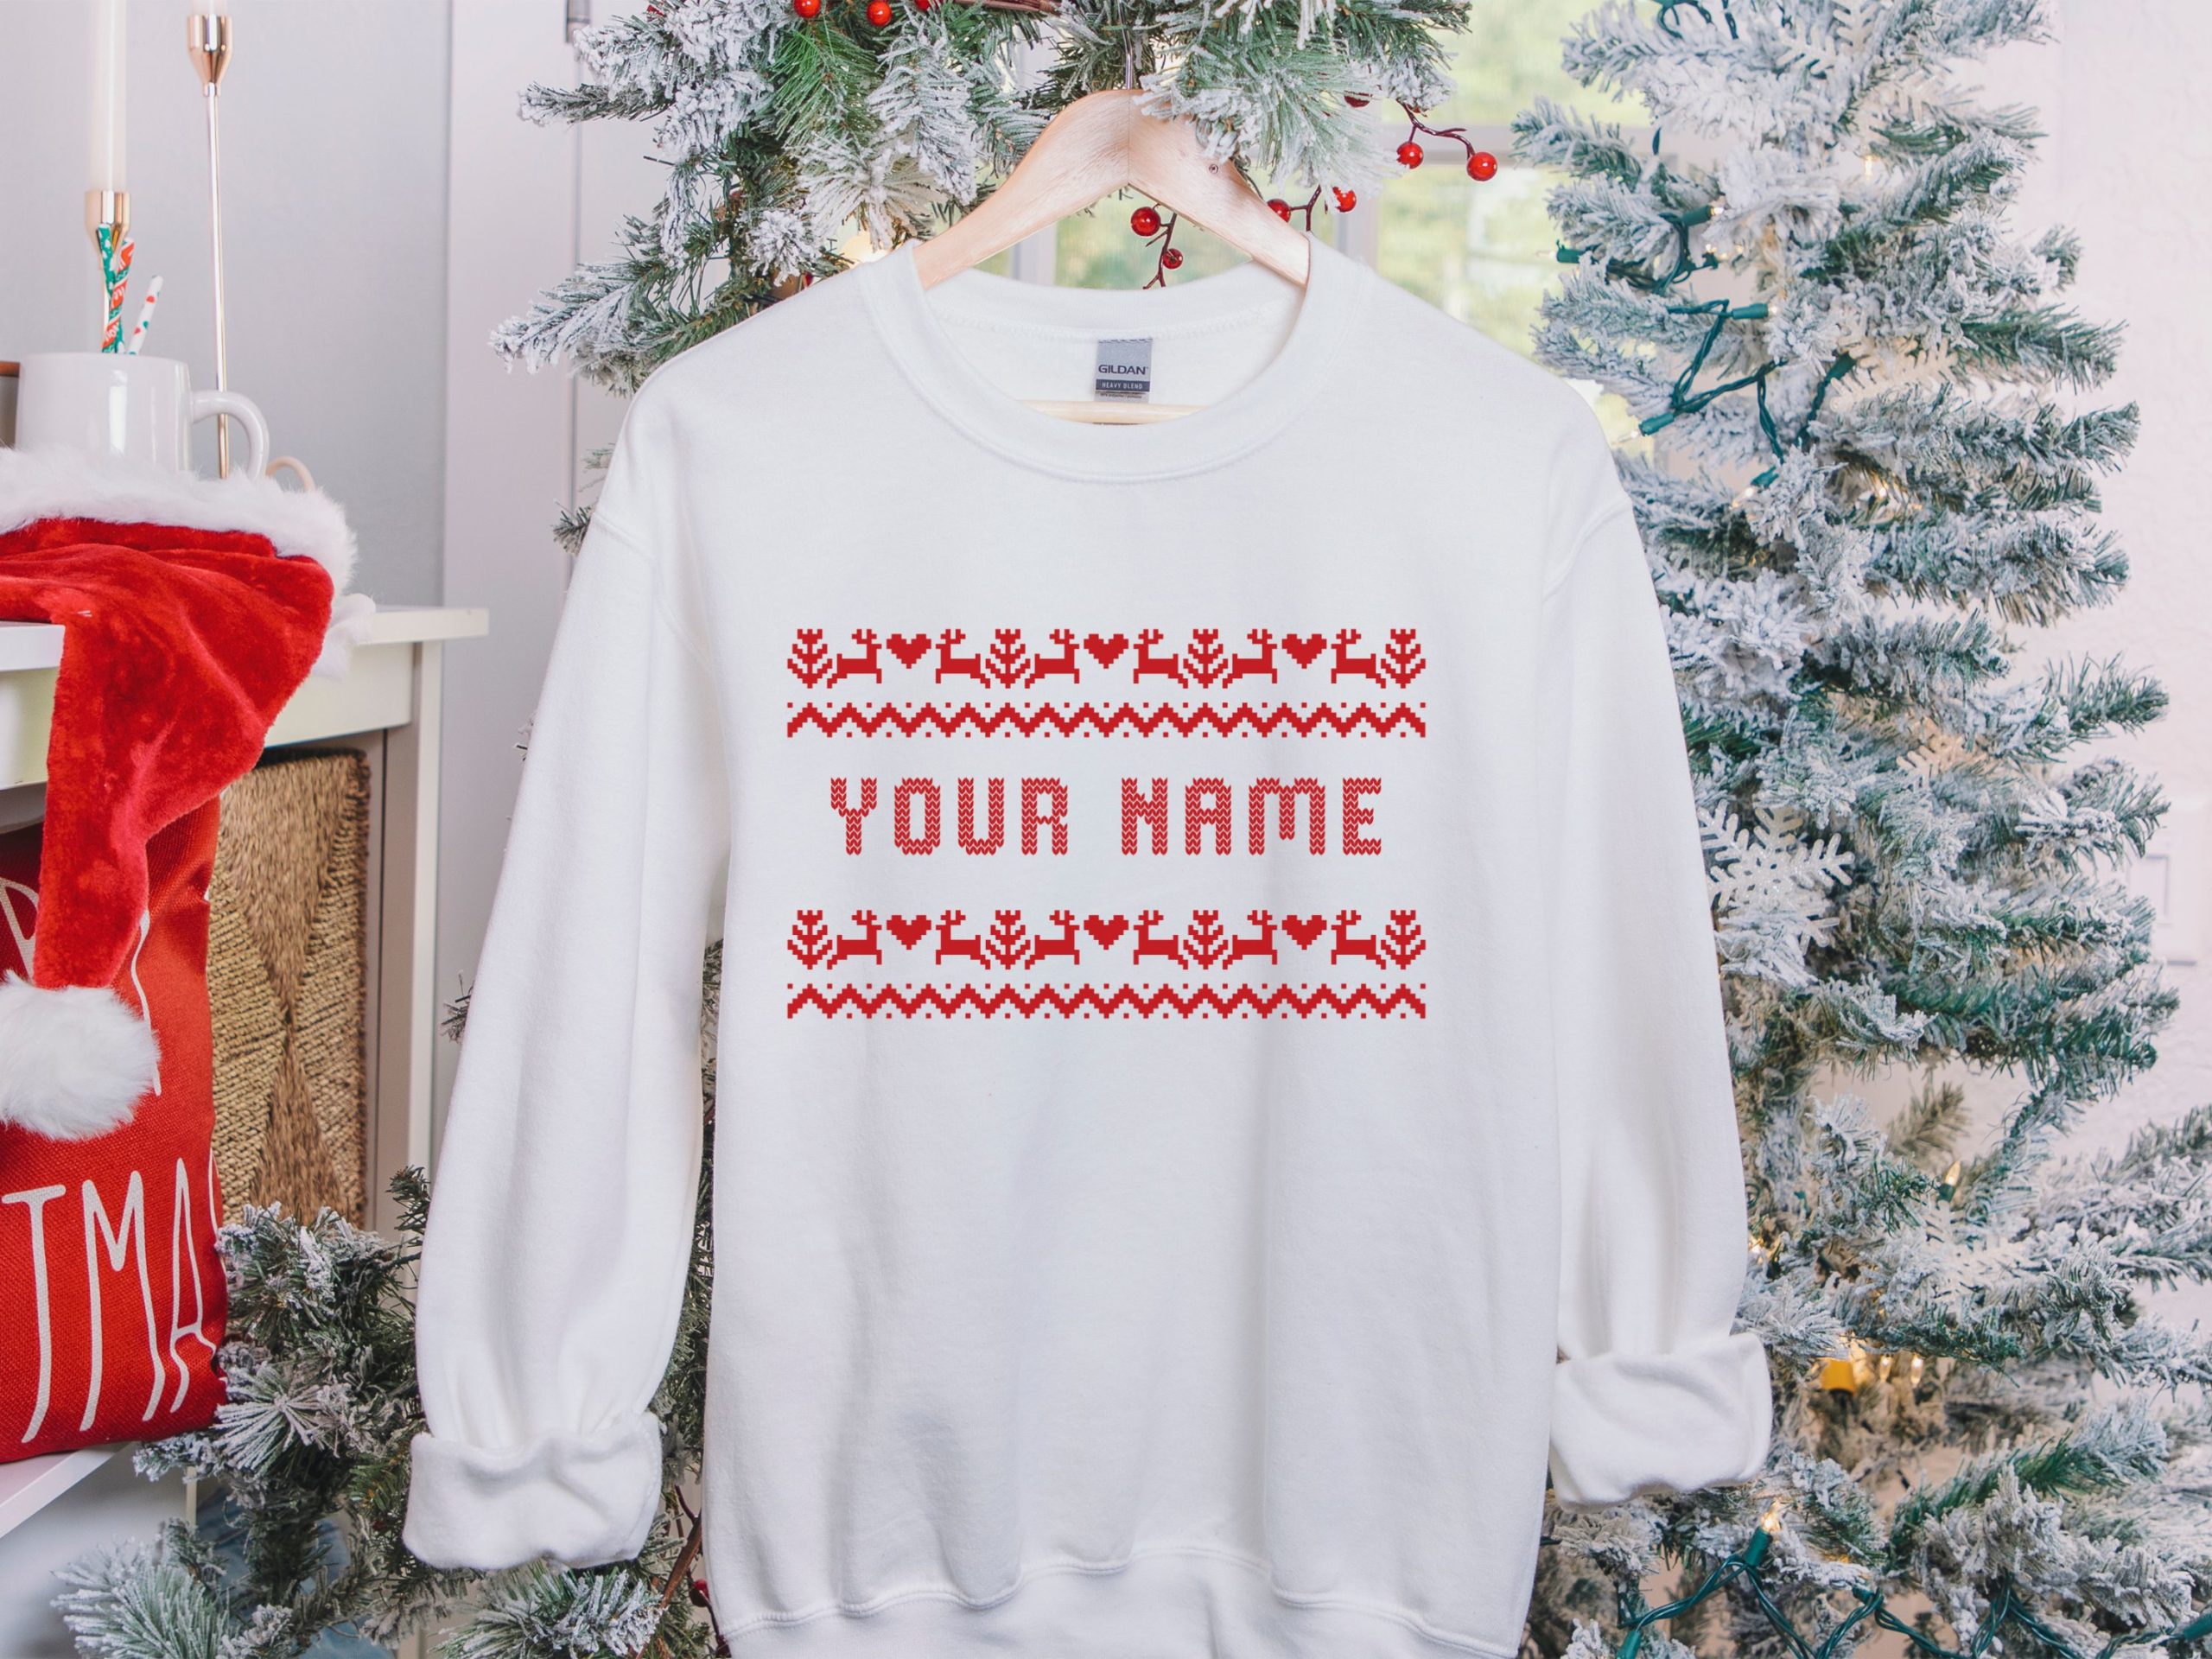 Family personalized Christmas ugly sweater